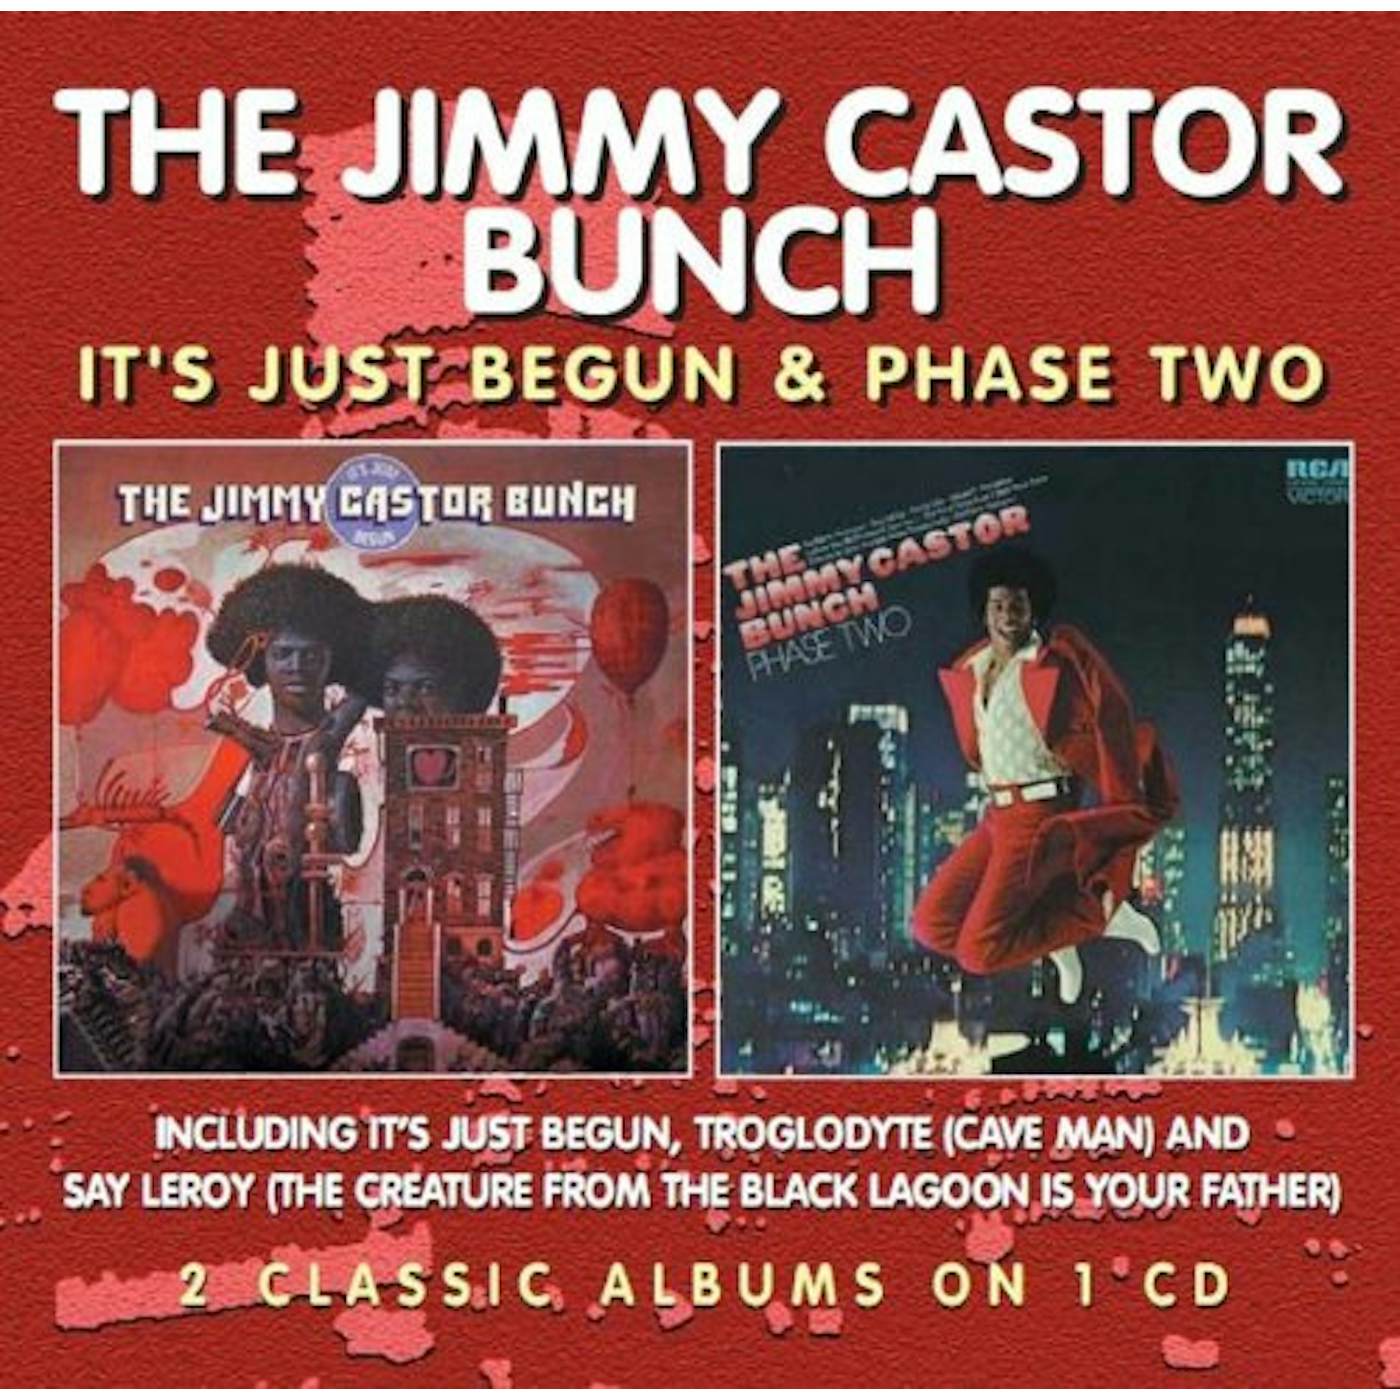 The Jimmy Castor Bunch IT'S JUST BEGUN/PHASE TWO CD